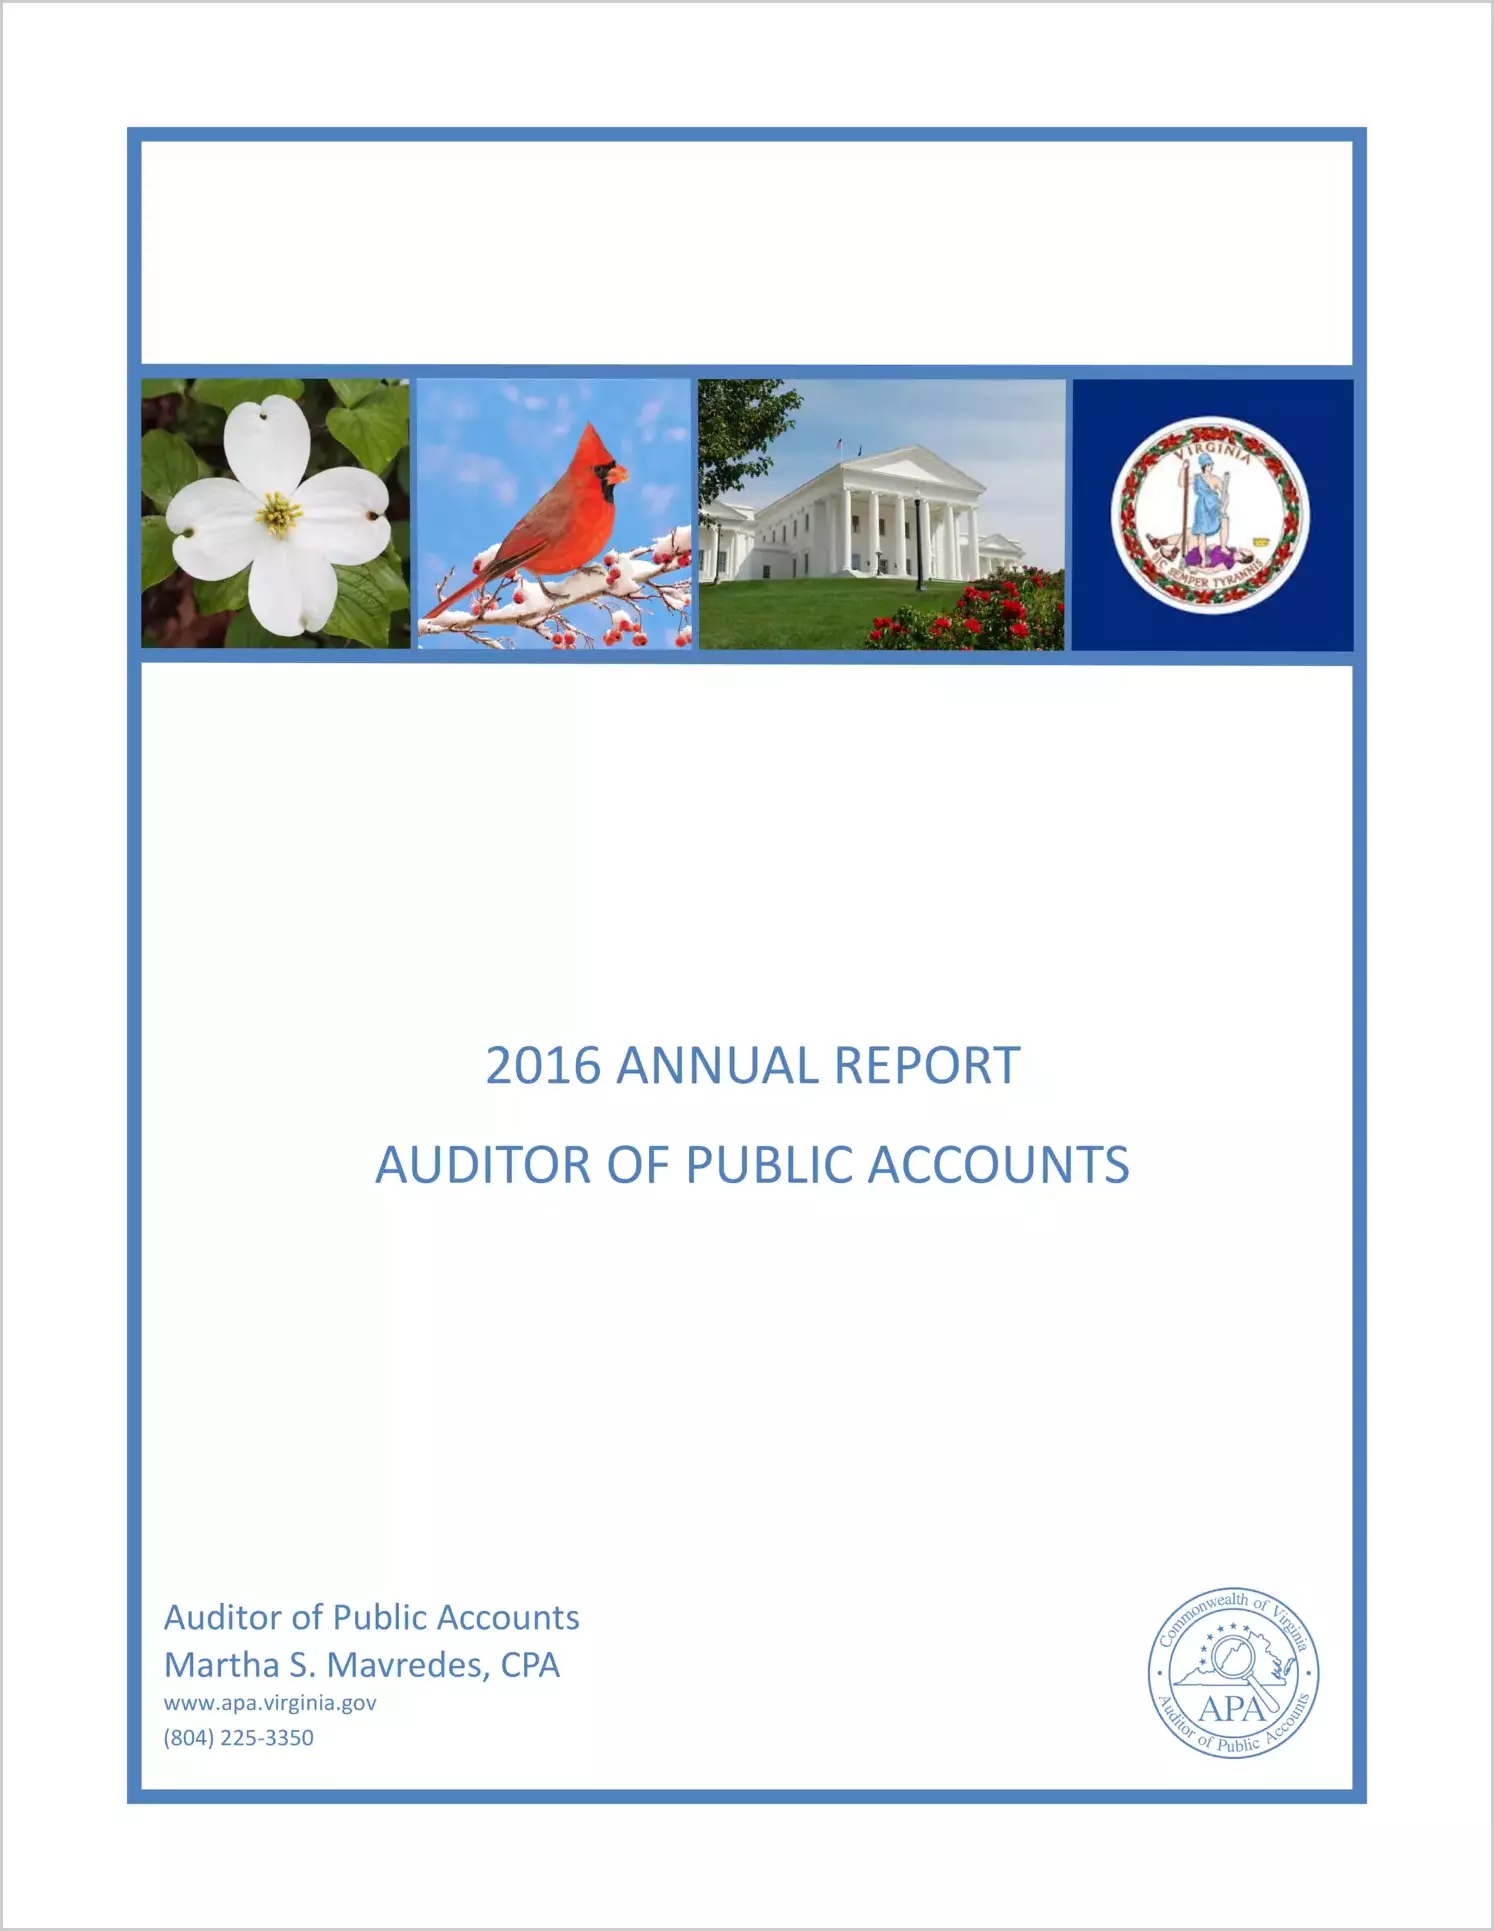 2016 Annual Report Auditor of Public Accounts